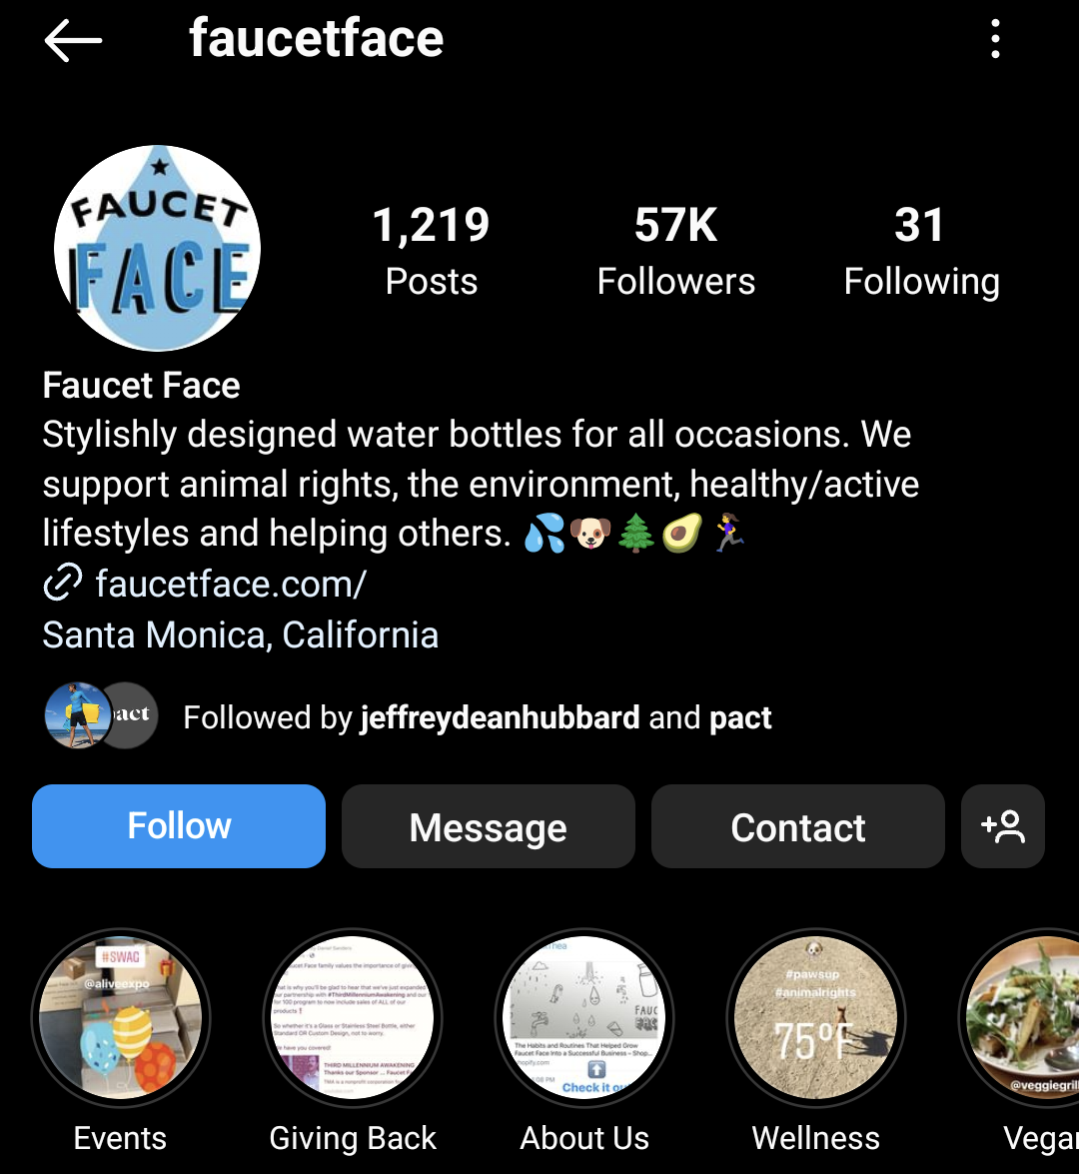 Faucet Face shares the brand's mission in its Instagram bio